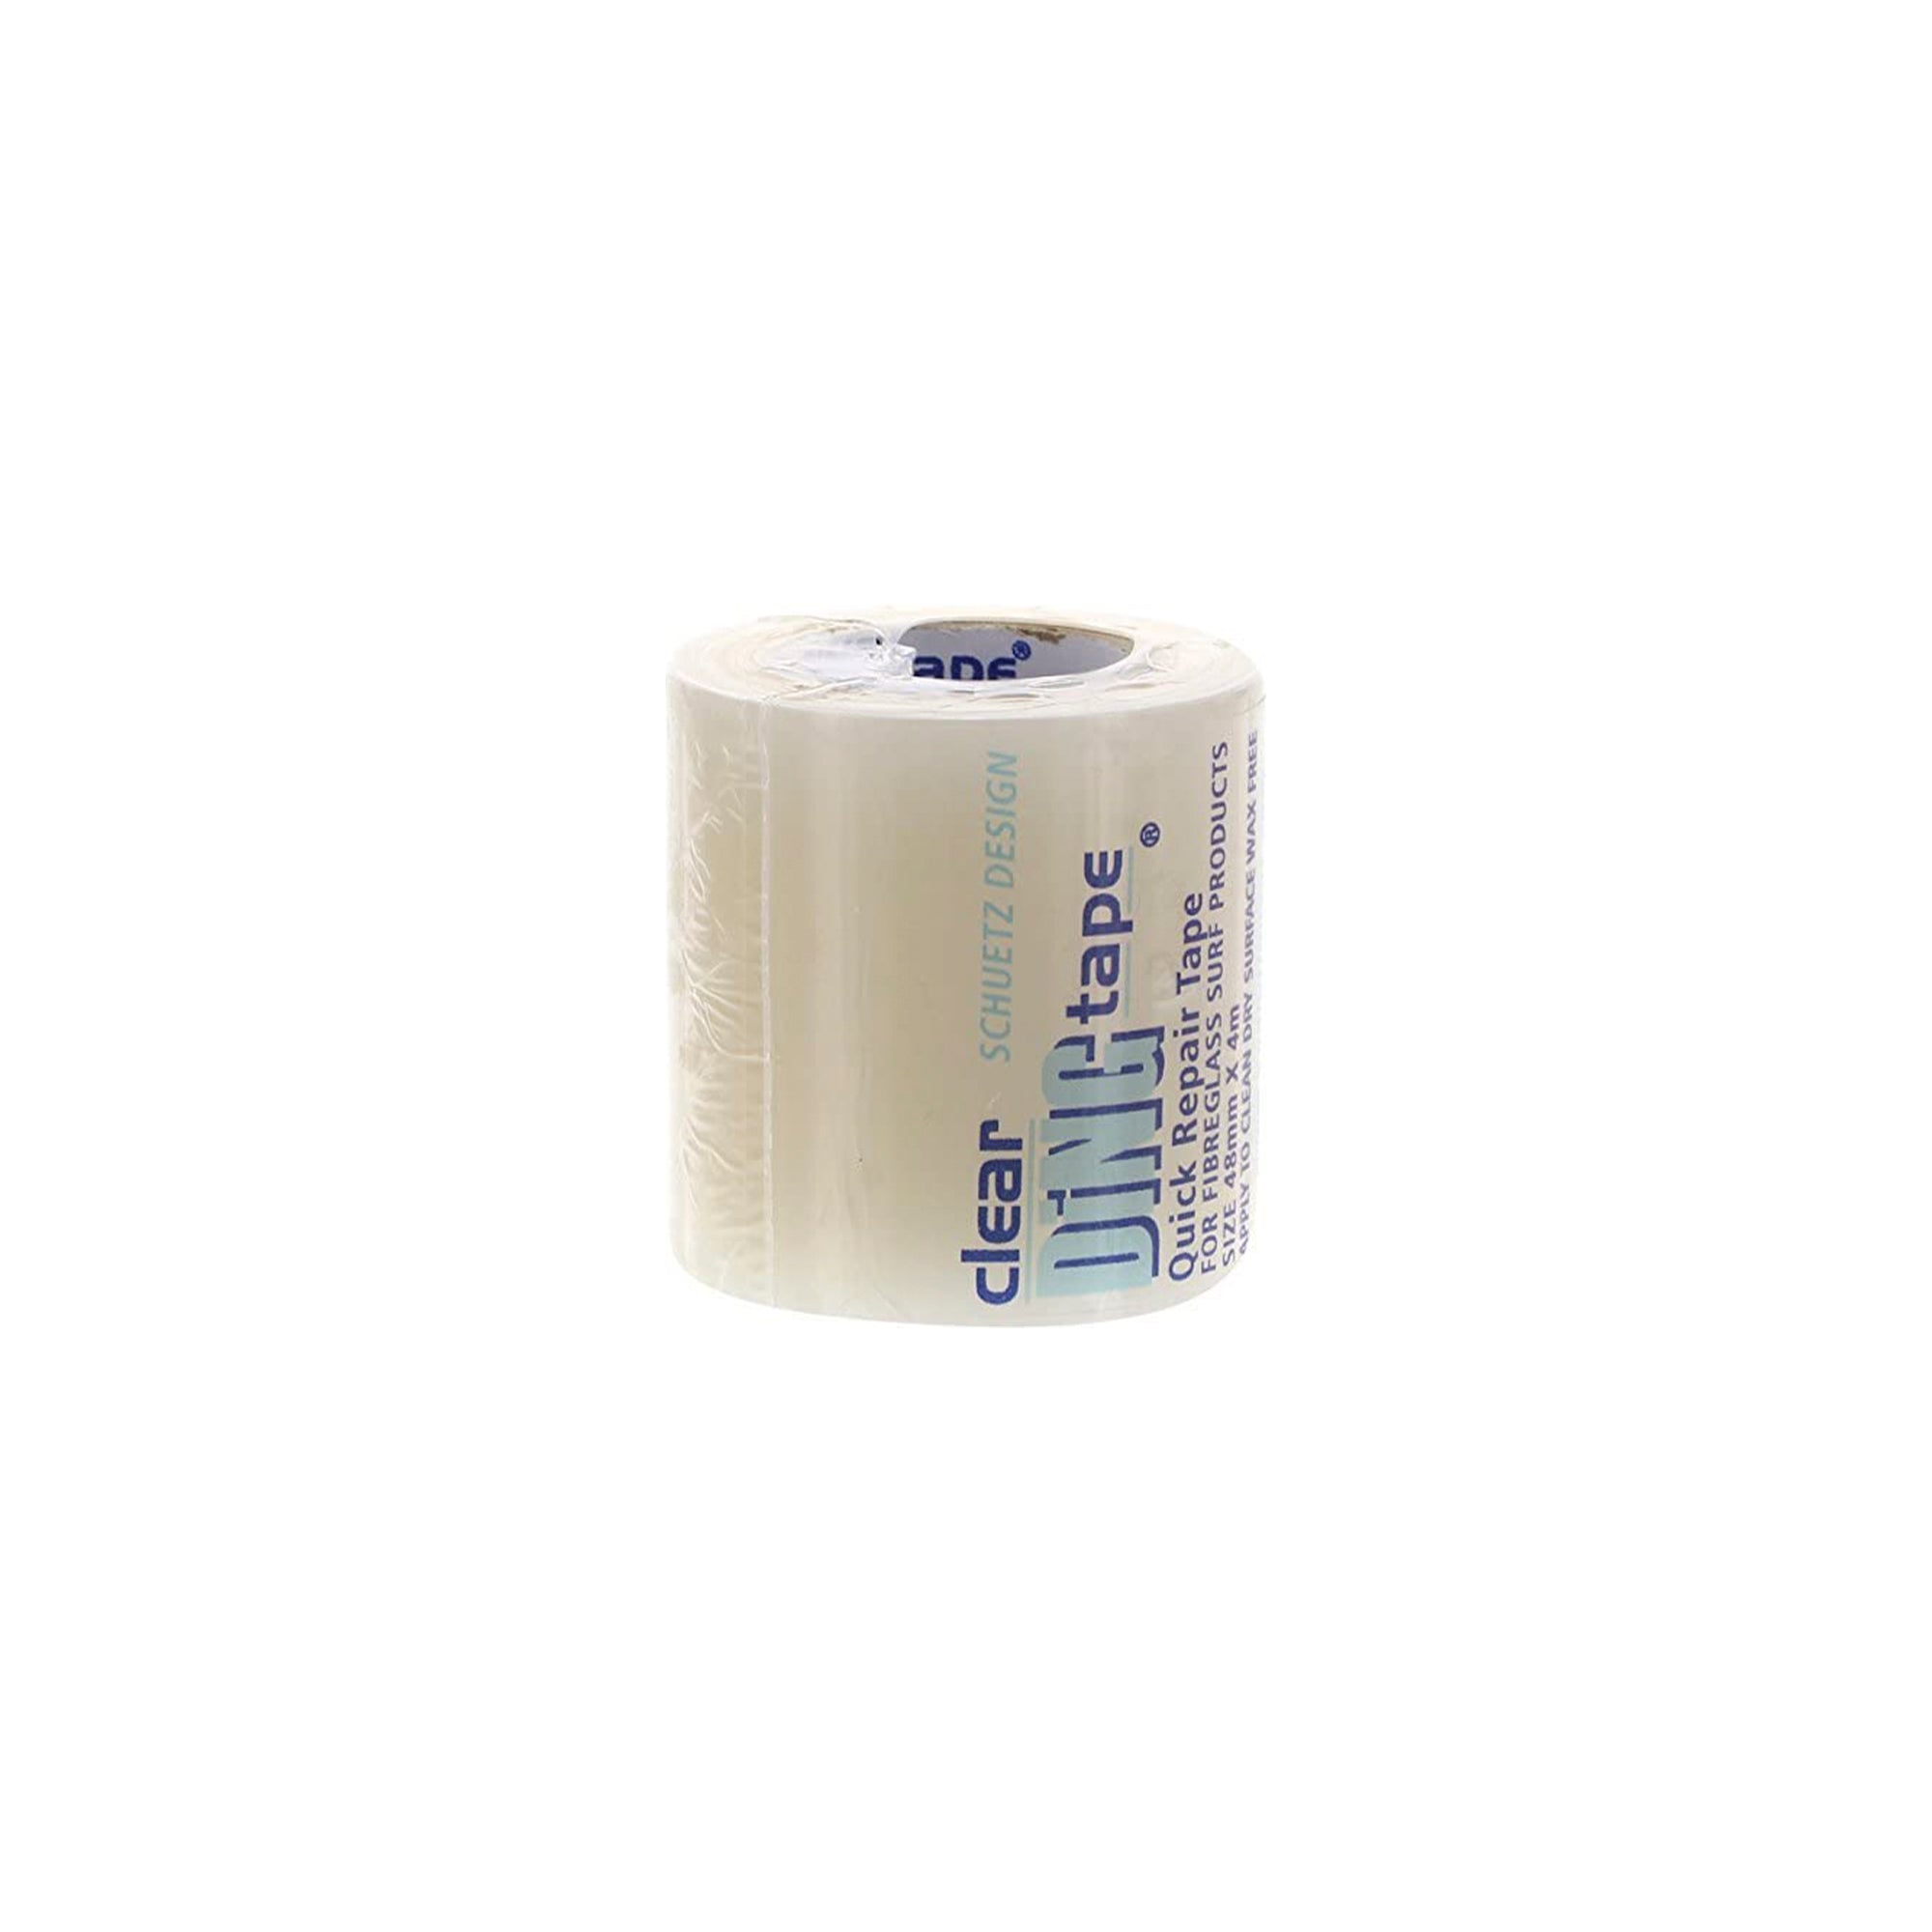 DING TAPE ROLL